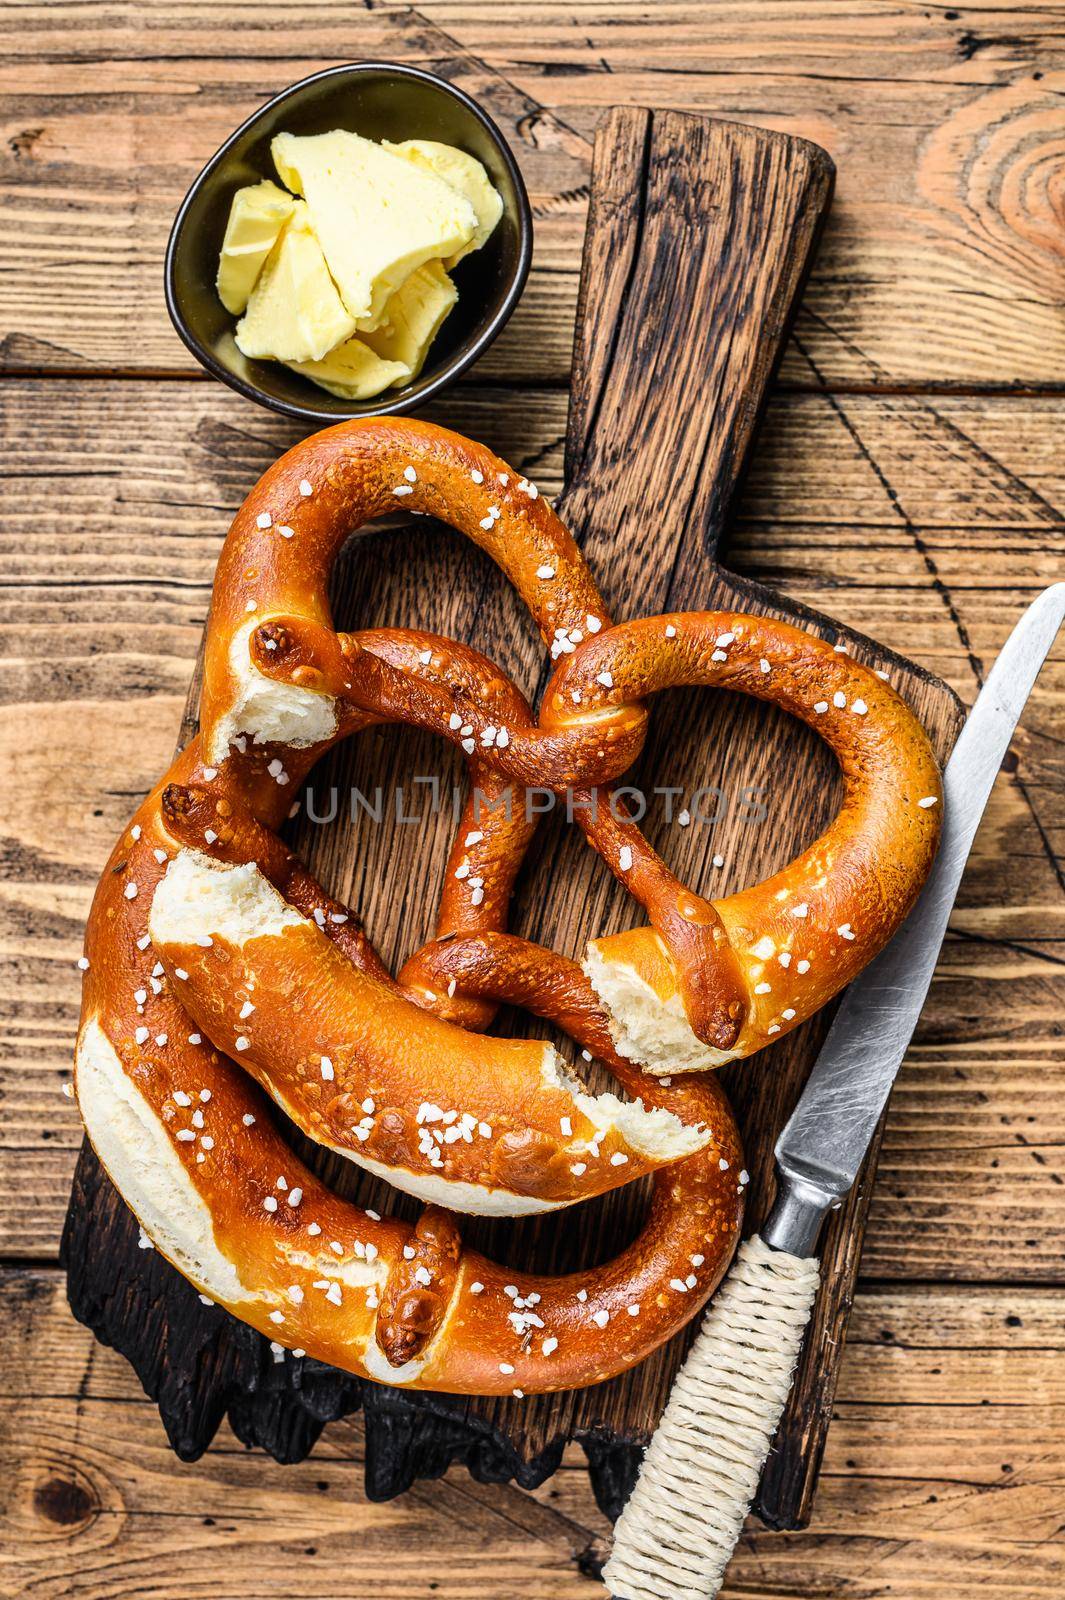 Baked pretzels with sea salt on a rustic wooden cutting board. Wooden background. Top view by Composter